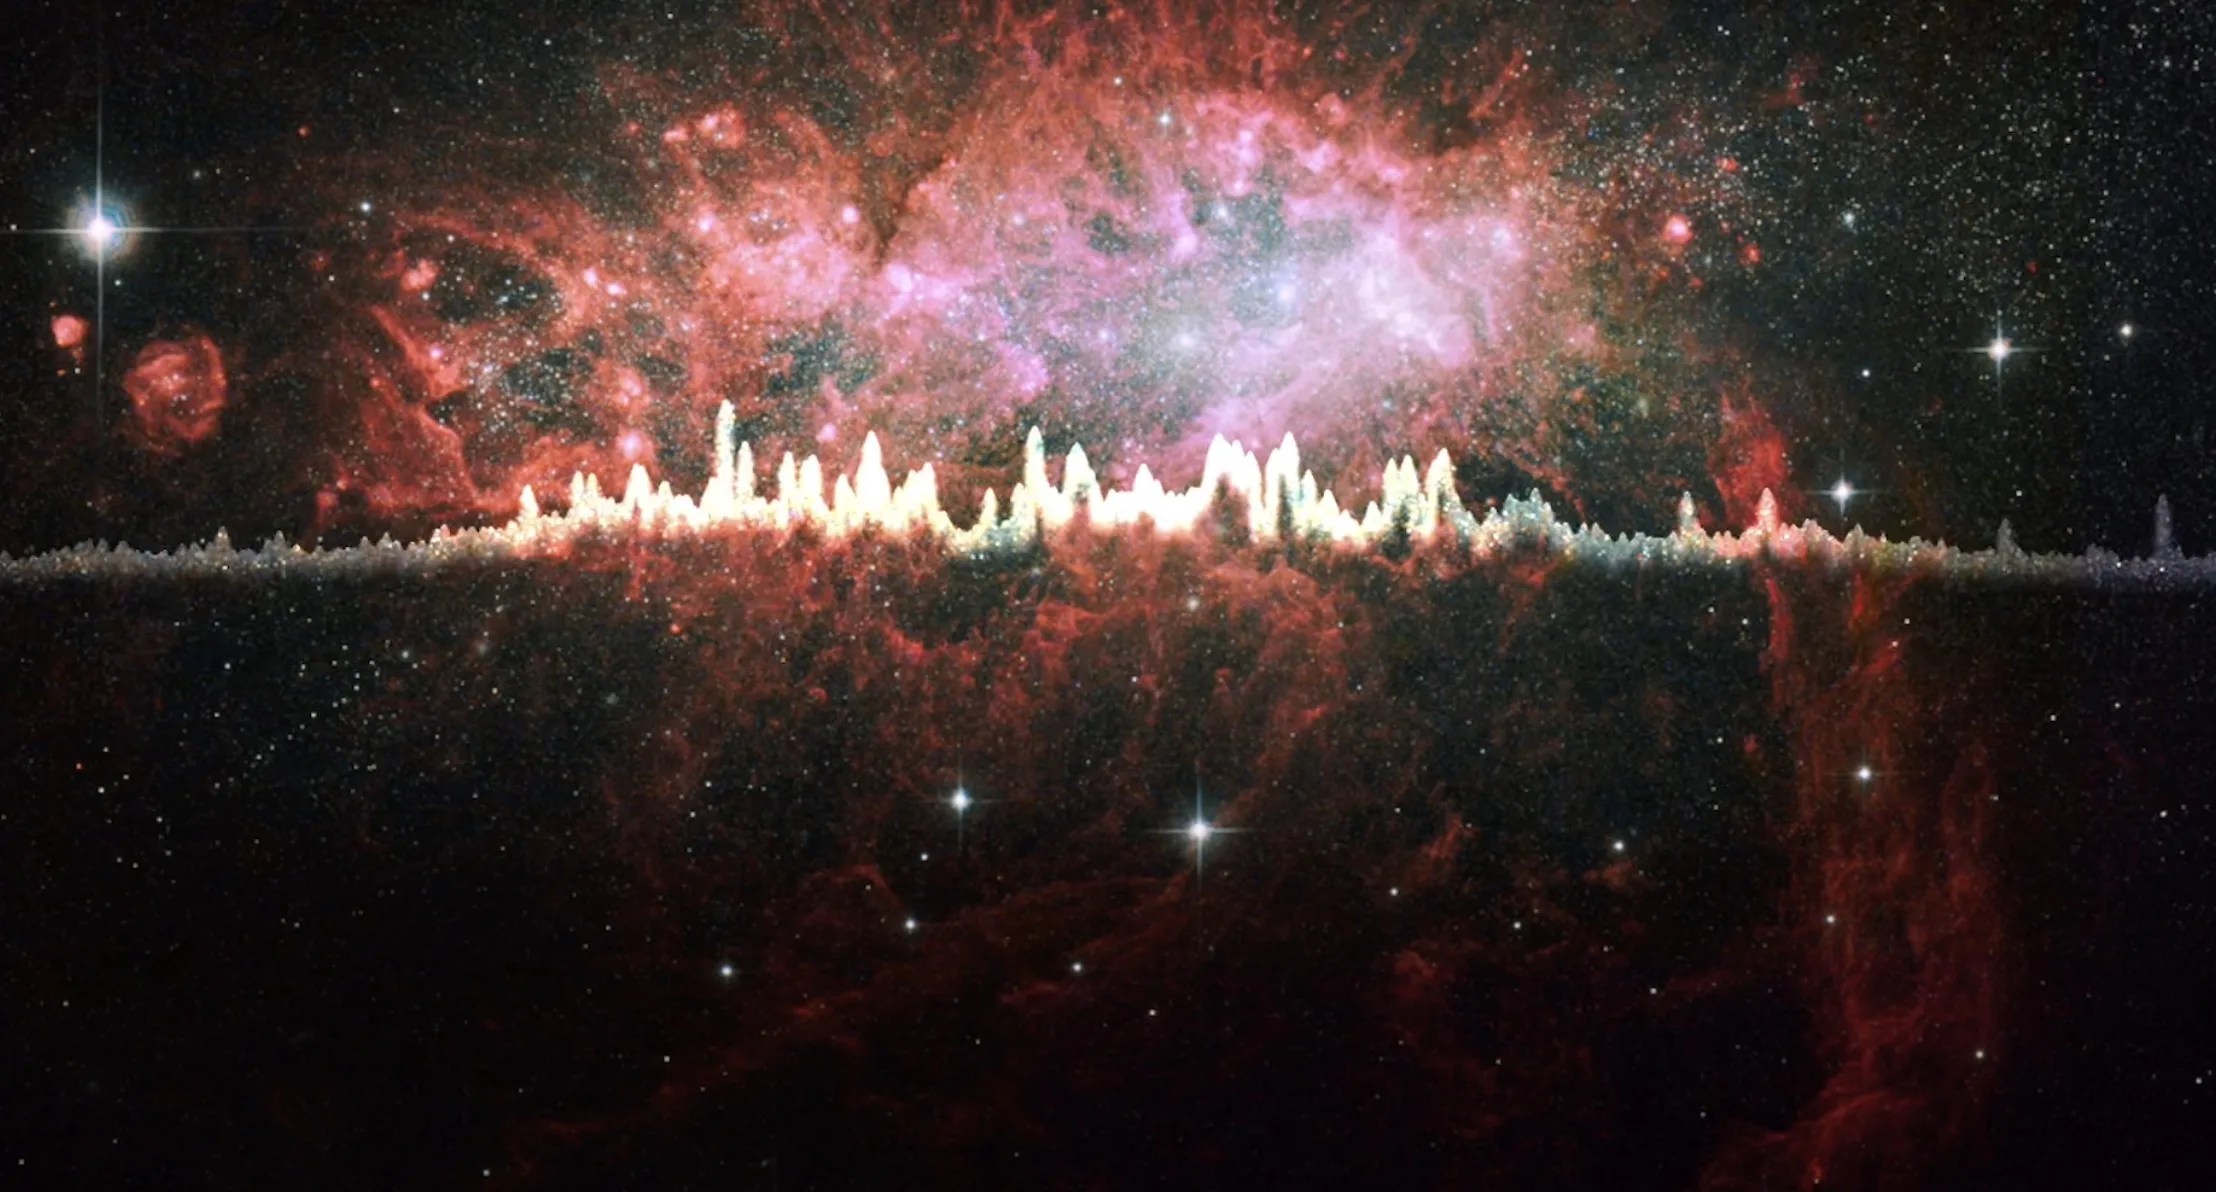 A bright red galaxy shines near the top of the image, with a line horizontally stretching and jutting across the image to signify a sonification being played.